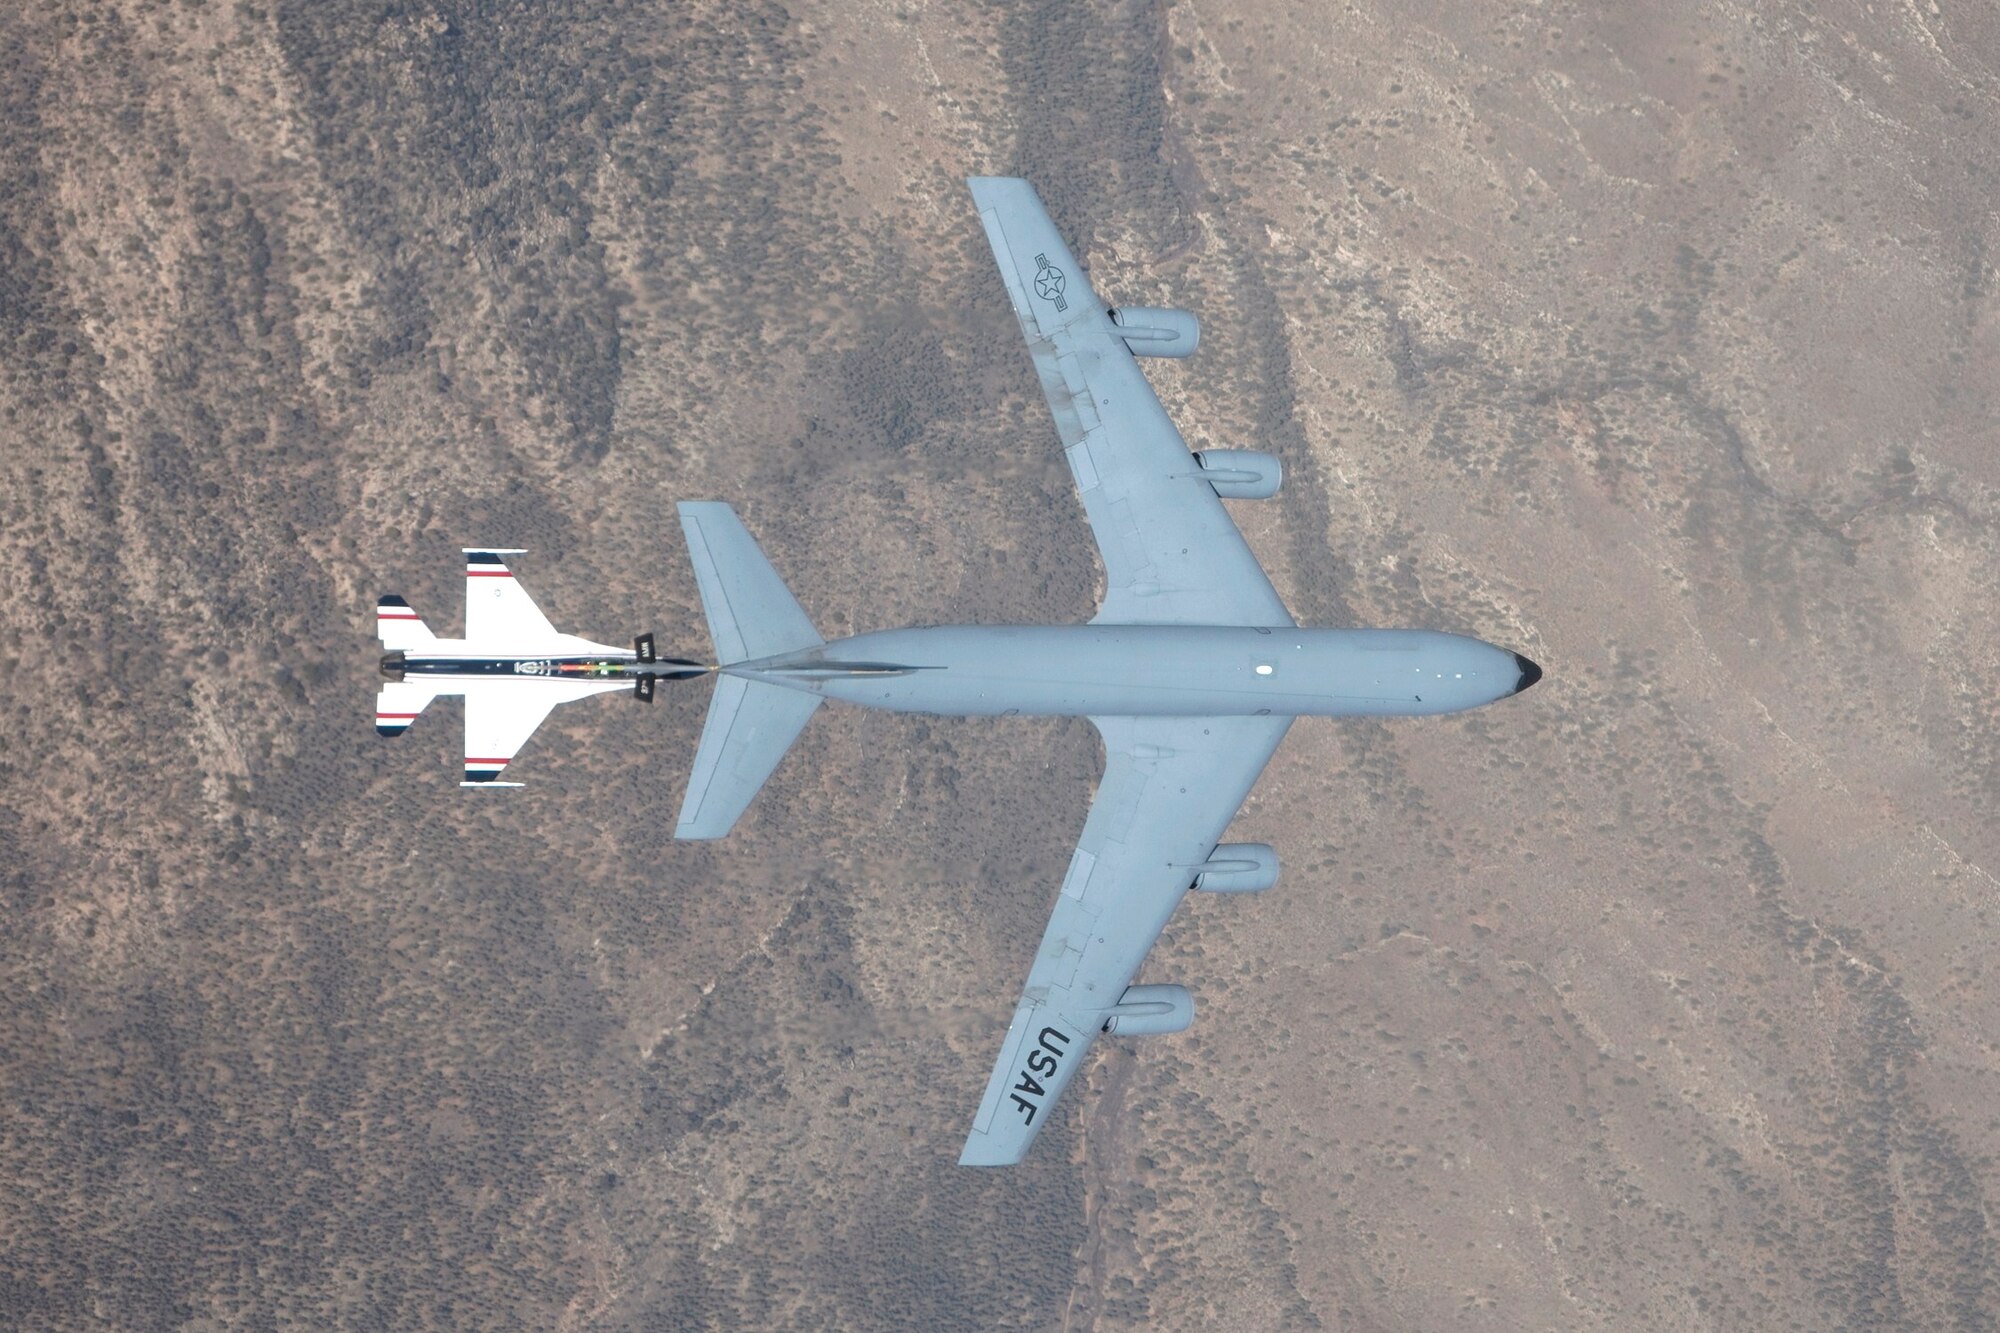 The United States Air Force Test Pilot School’s VISTA (Variable stability In-flight Simulator Test Aircraft) F-16 positions itself underneath a KC-135 refueler during a flight test mission conducted by TPS students March 17. The maneuver is part of the Basic Envelope Air Refueling Control Laws, or BEAR CLAW, test project, which is aimed at obtaining preliminary data leading ultimately to have an unmanned aerial vehicle conduct air-to-air refueling. (Air Force photo by Bobbi Zapka)